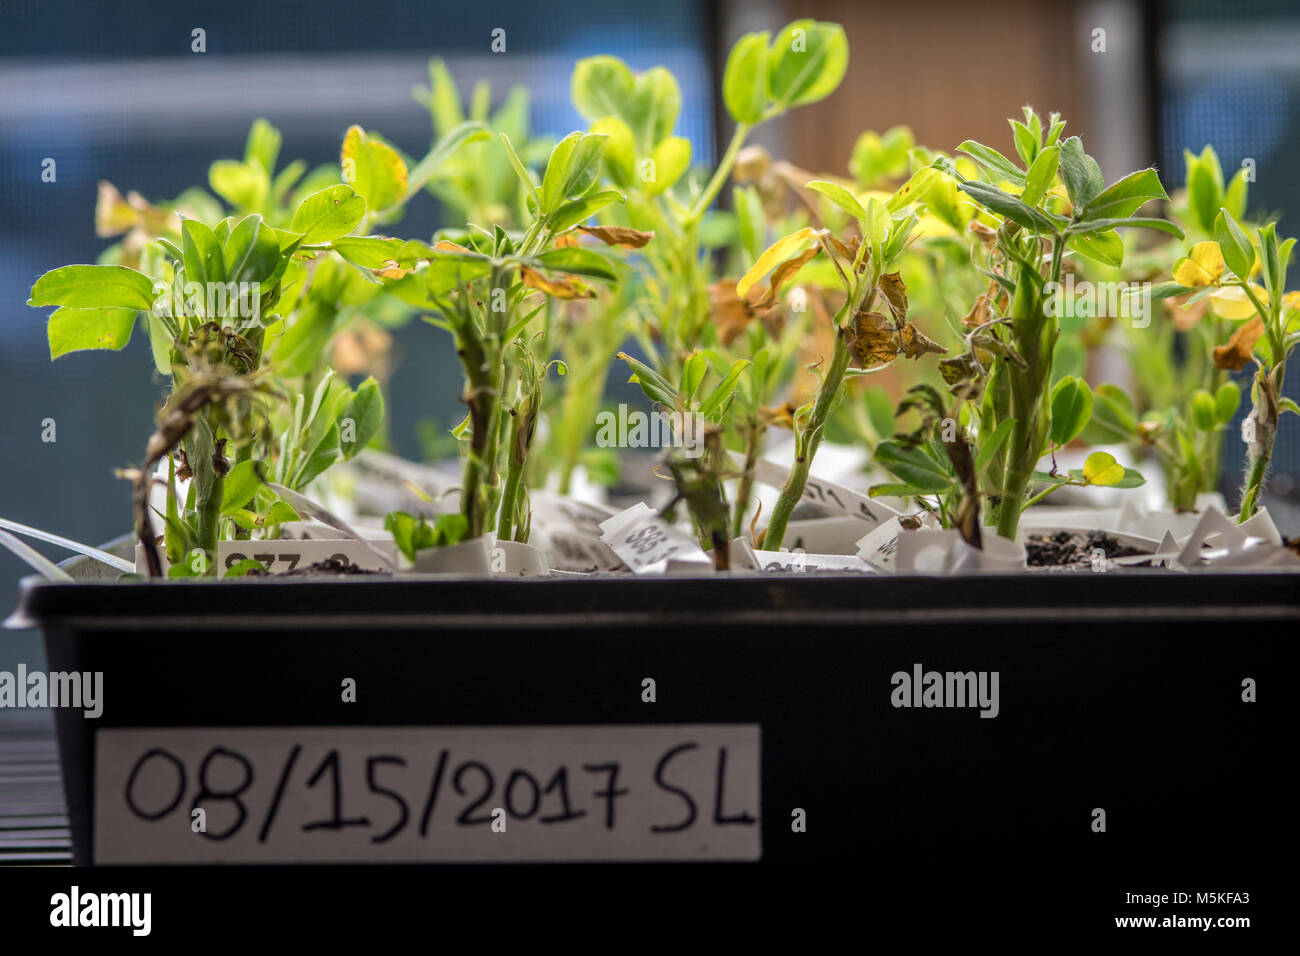 Samples of peanut plants being used for scientific experiments, Tifton, Georgia. Stock Photo